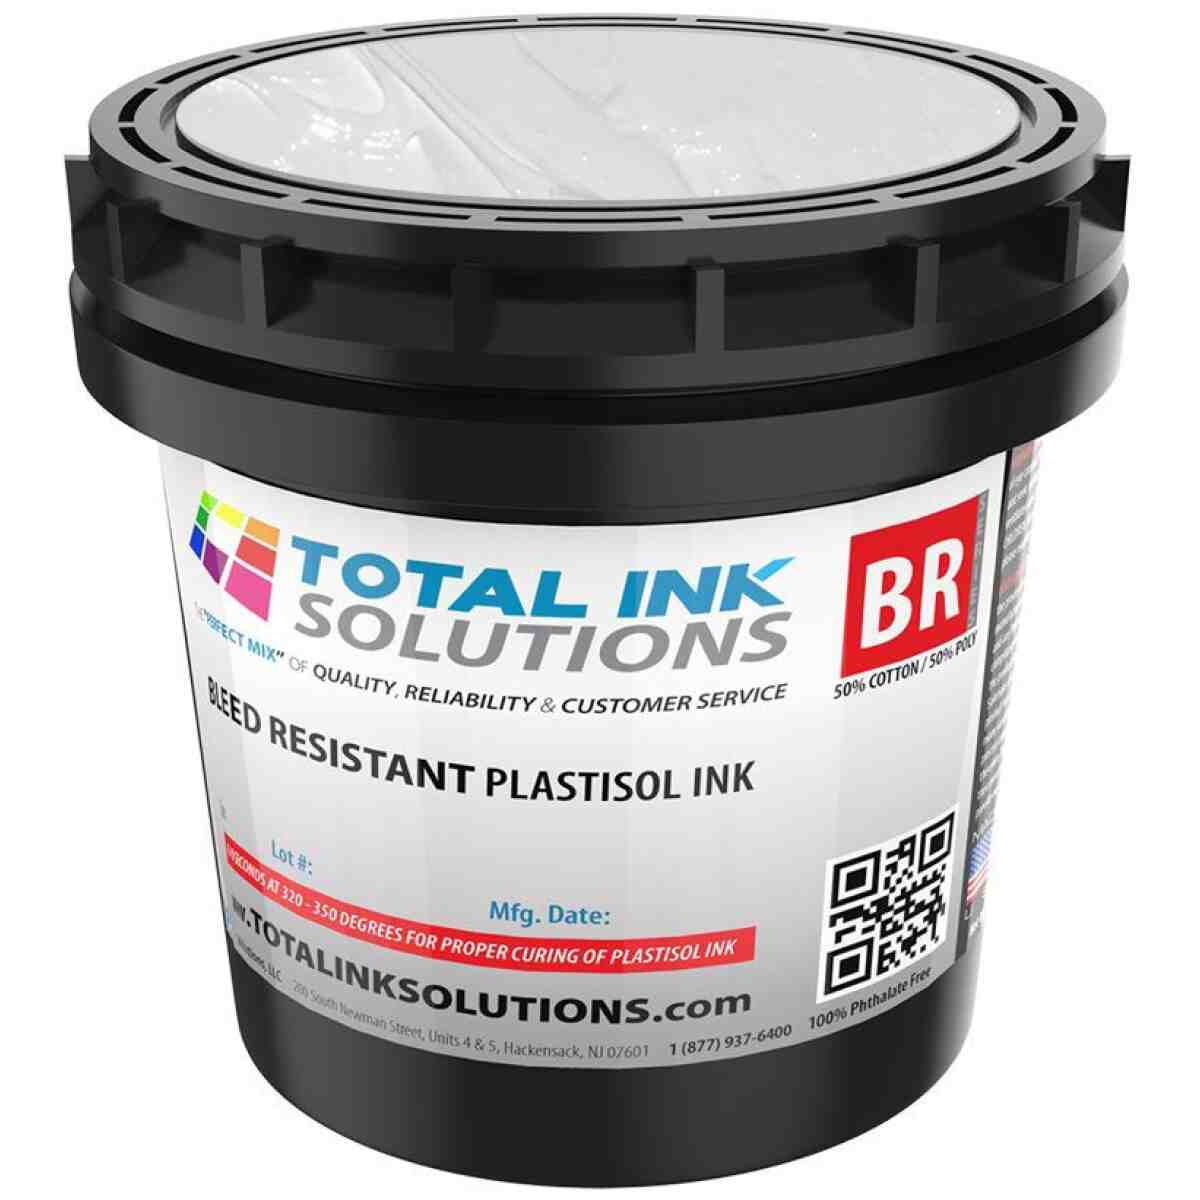 Bleed Resistant Plastisol Ink - 5 Star Bright White - Gallon TOTAL INK SOLUTIONS®